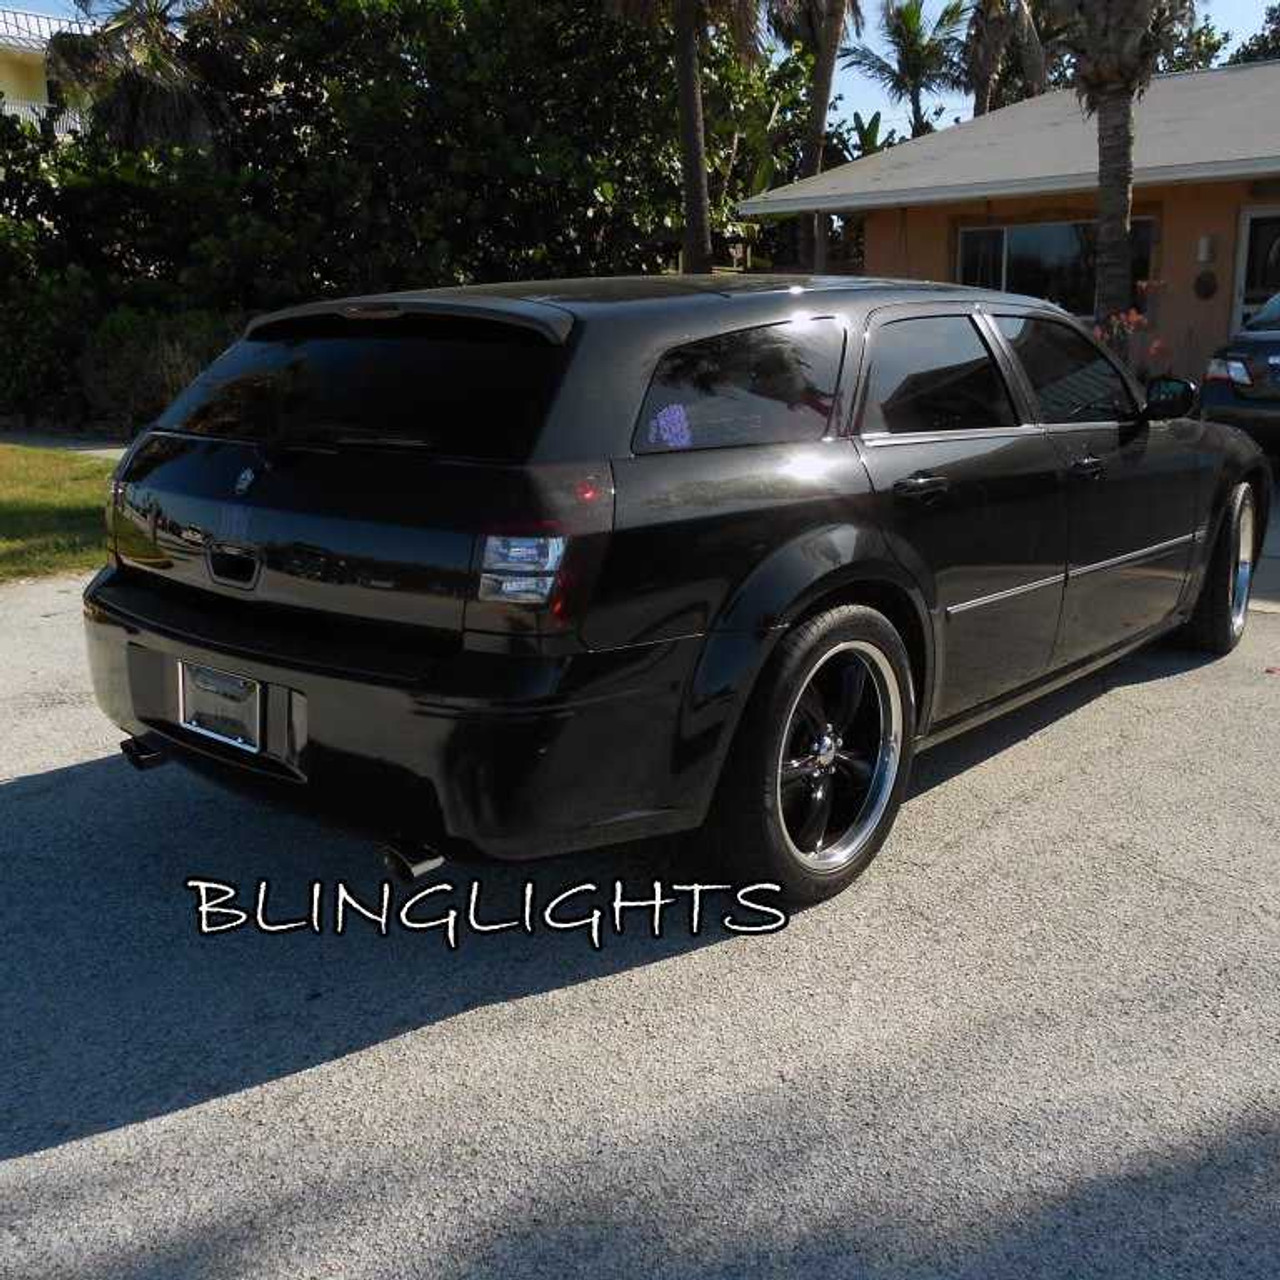 2005-2008 Dodge Magnum Tinted Smoked Taillamp Taillights Overlays Film Protection